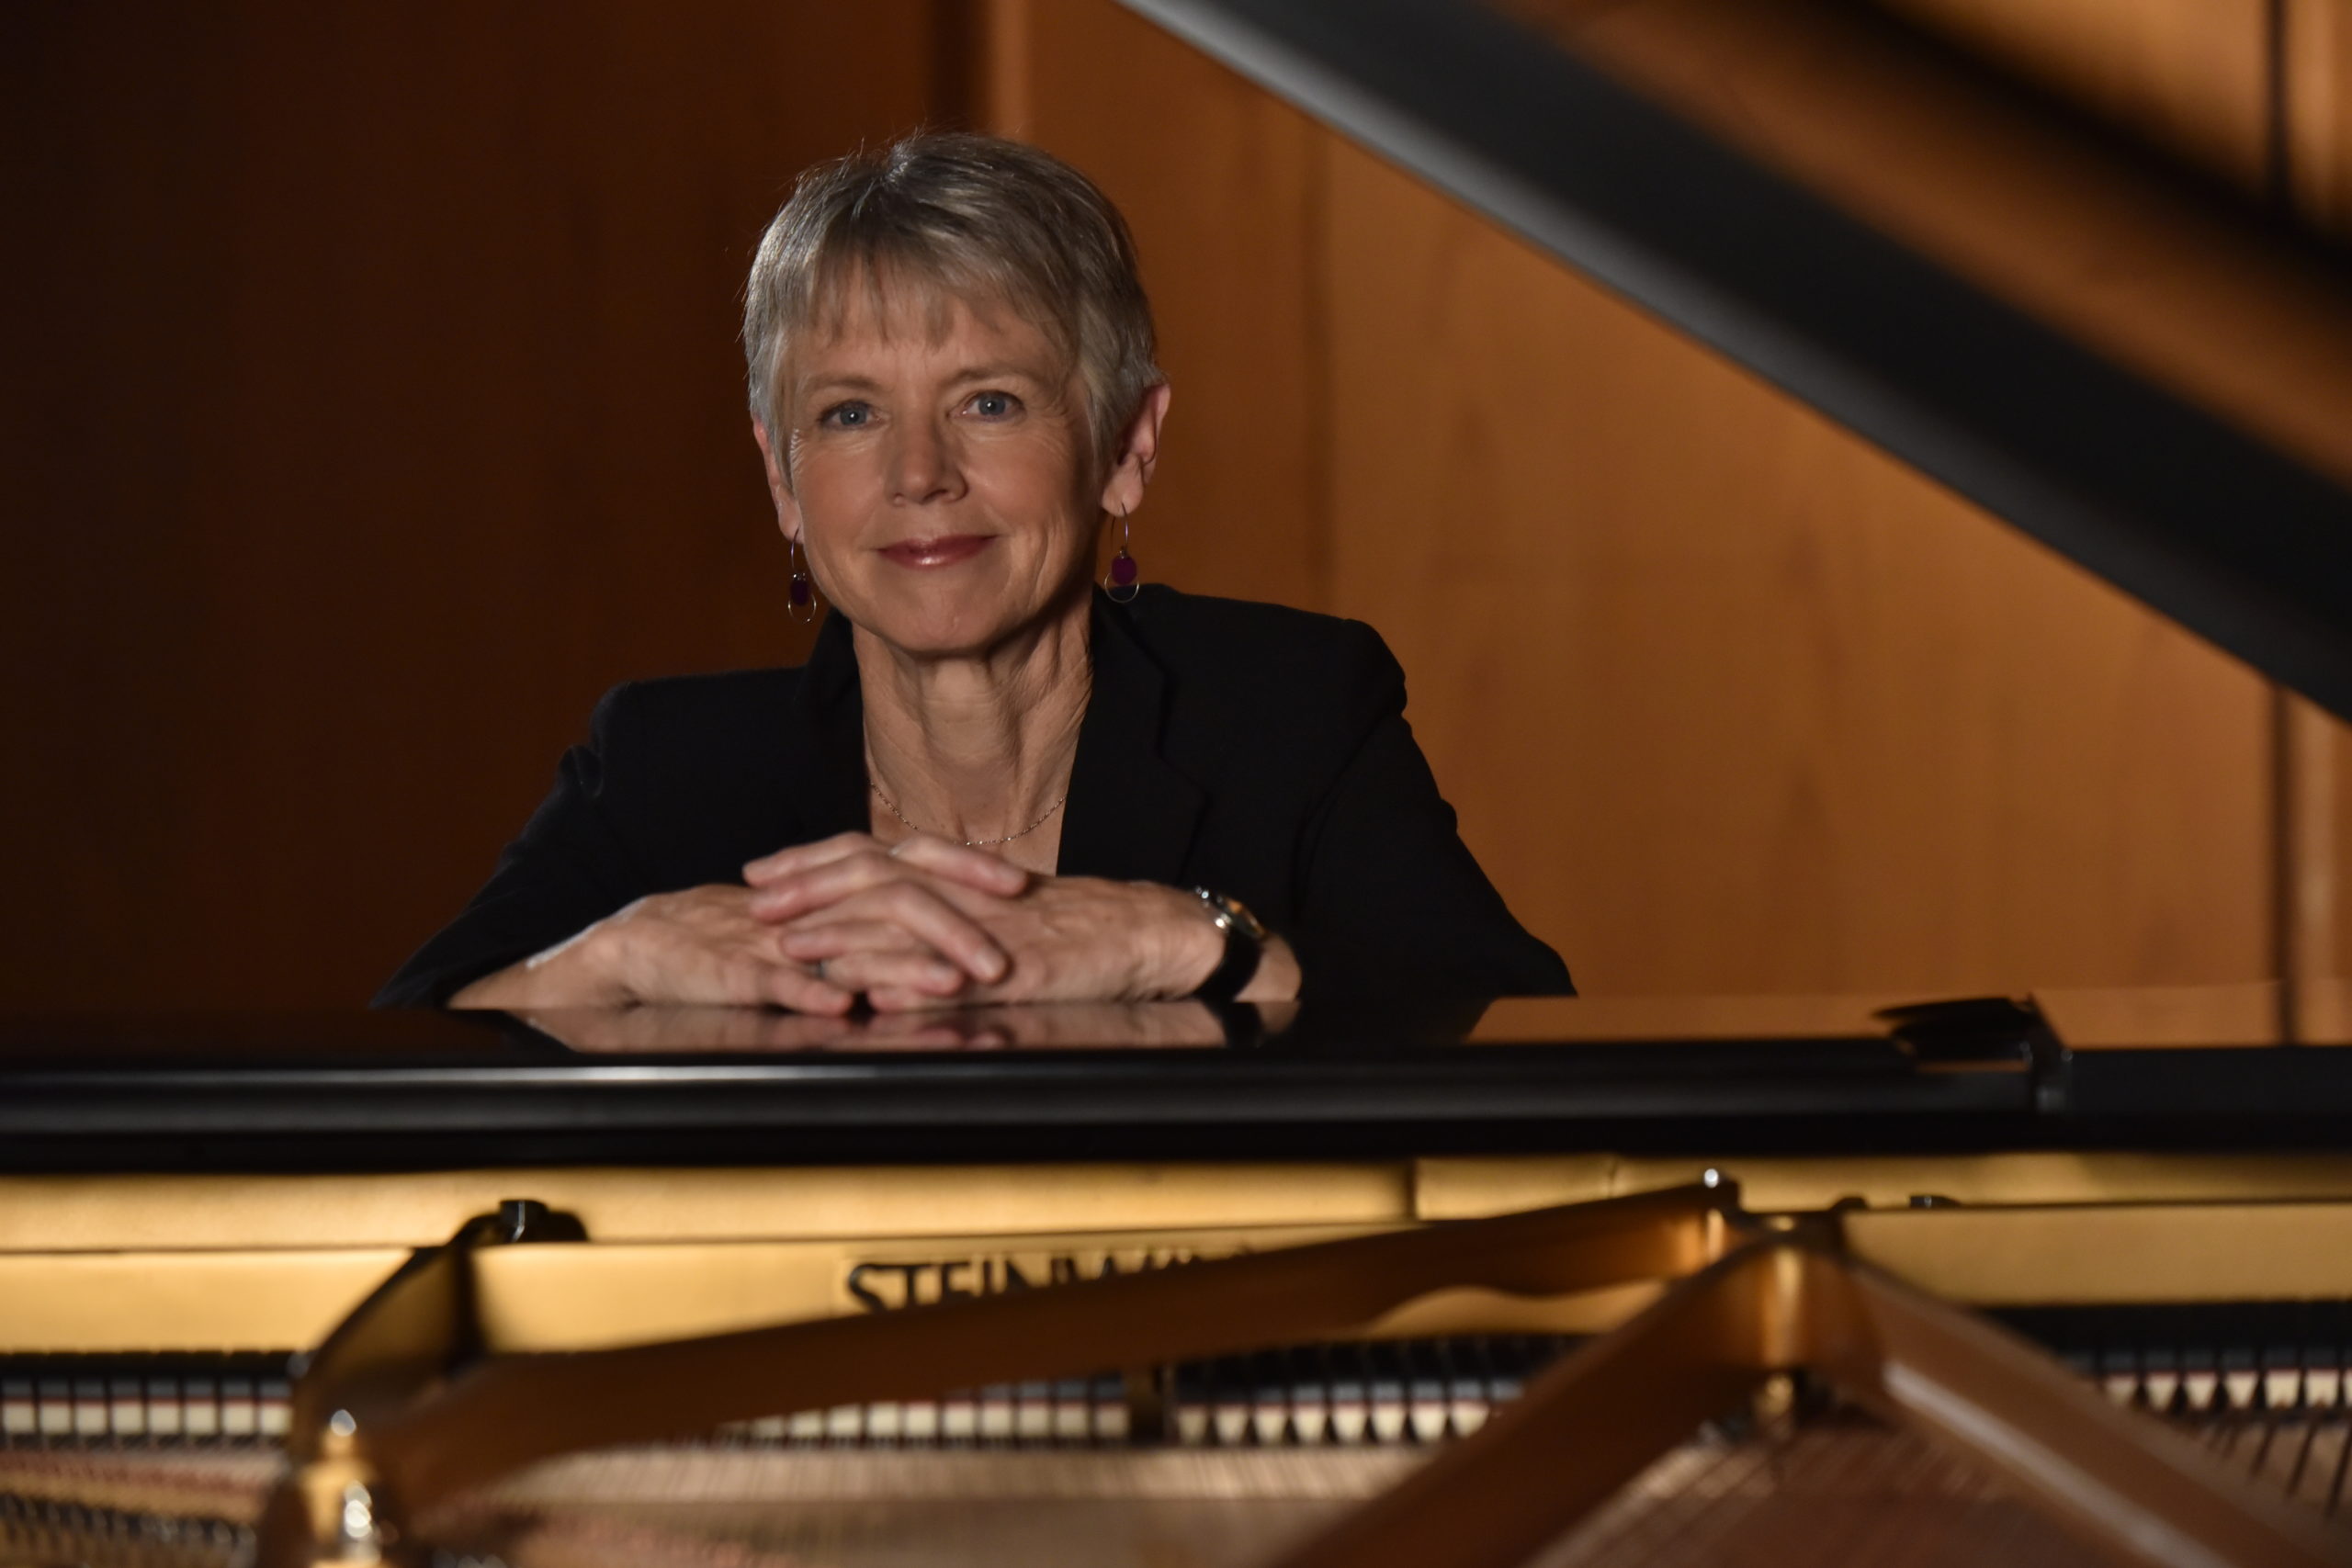 Ellen Rowe seated at a piano